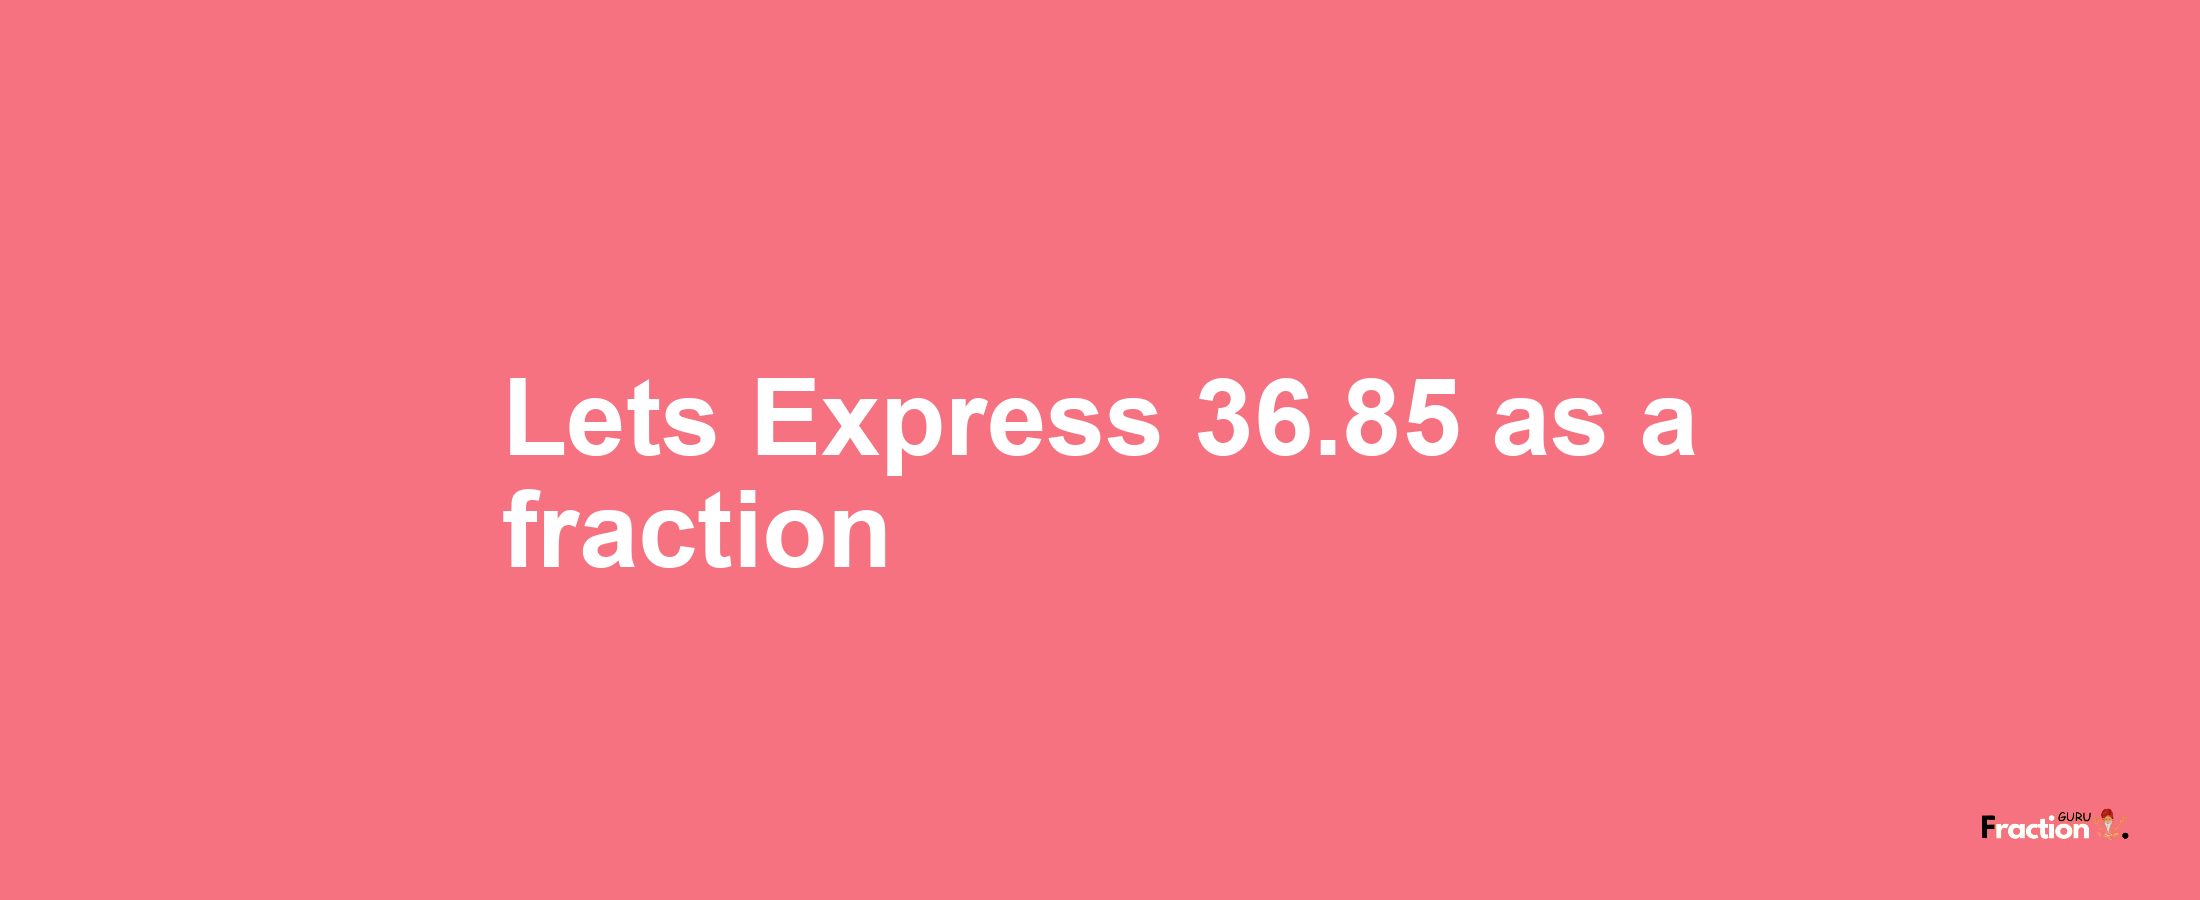 Lets Express 36.85 as afraction